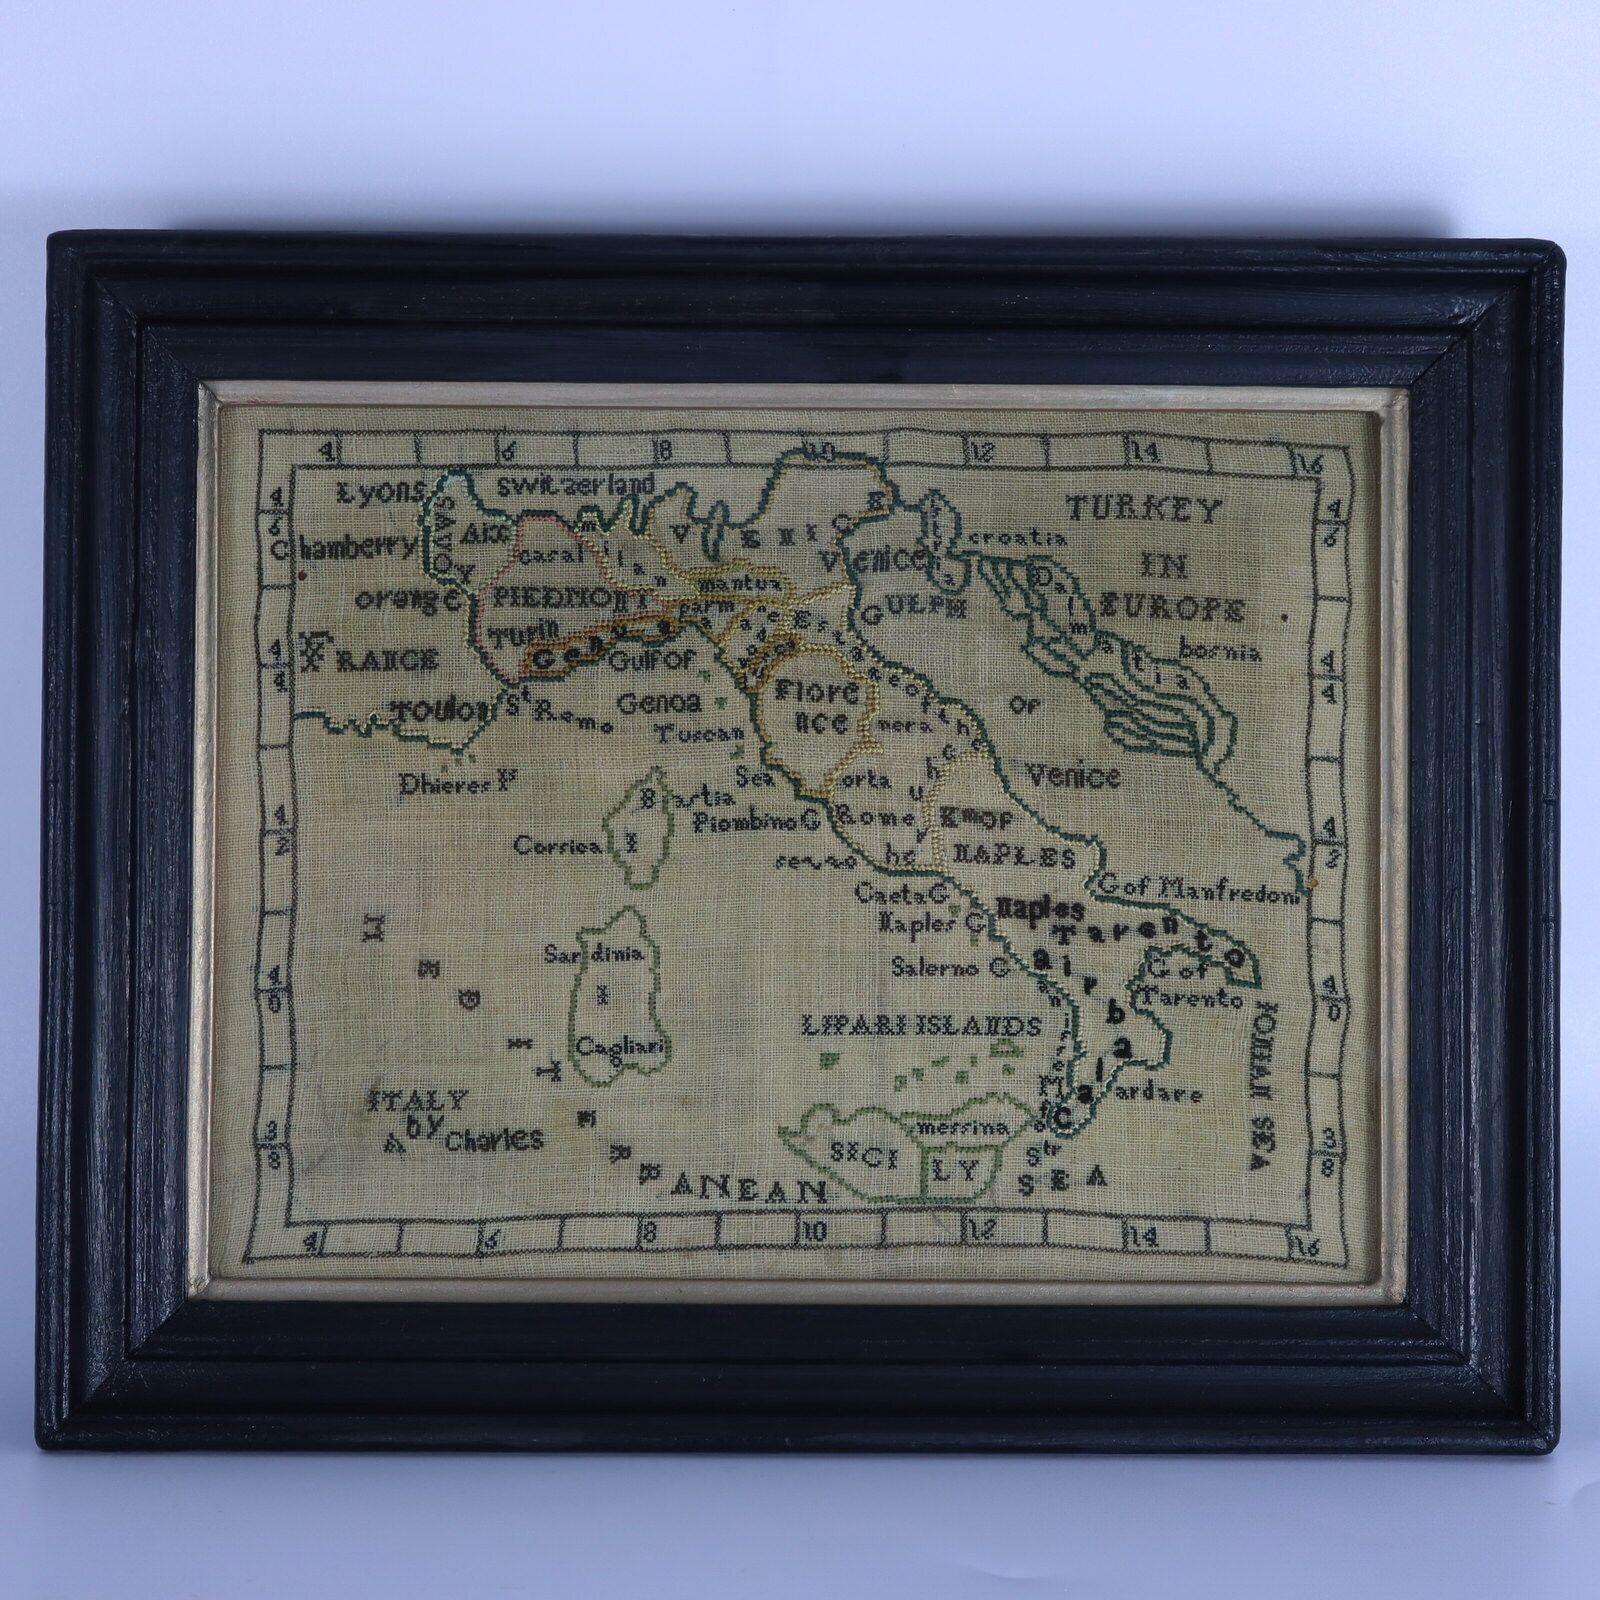 Set of 3 Map Samplers by A Charles. All depict countries, cities, seas and landmarks of the respective countries. The first entitled, 'SPAIN and PORTUGAL'. The second, 'MAP OF FRANCE'. The third, 'ITALY'. The samplers are worked in silk thread on